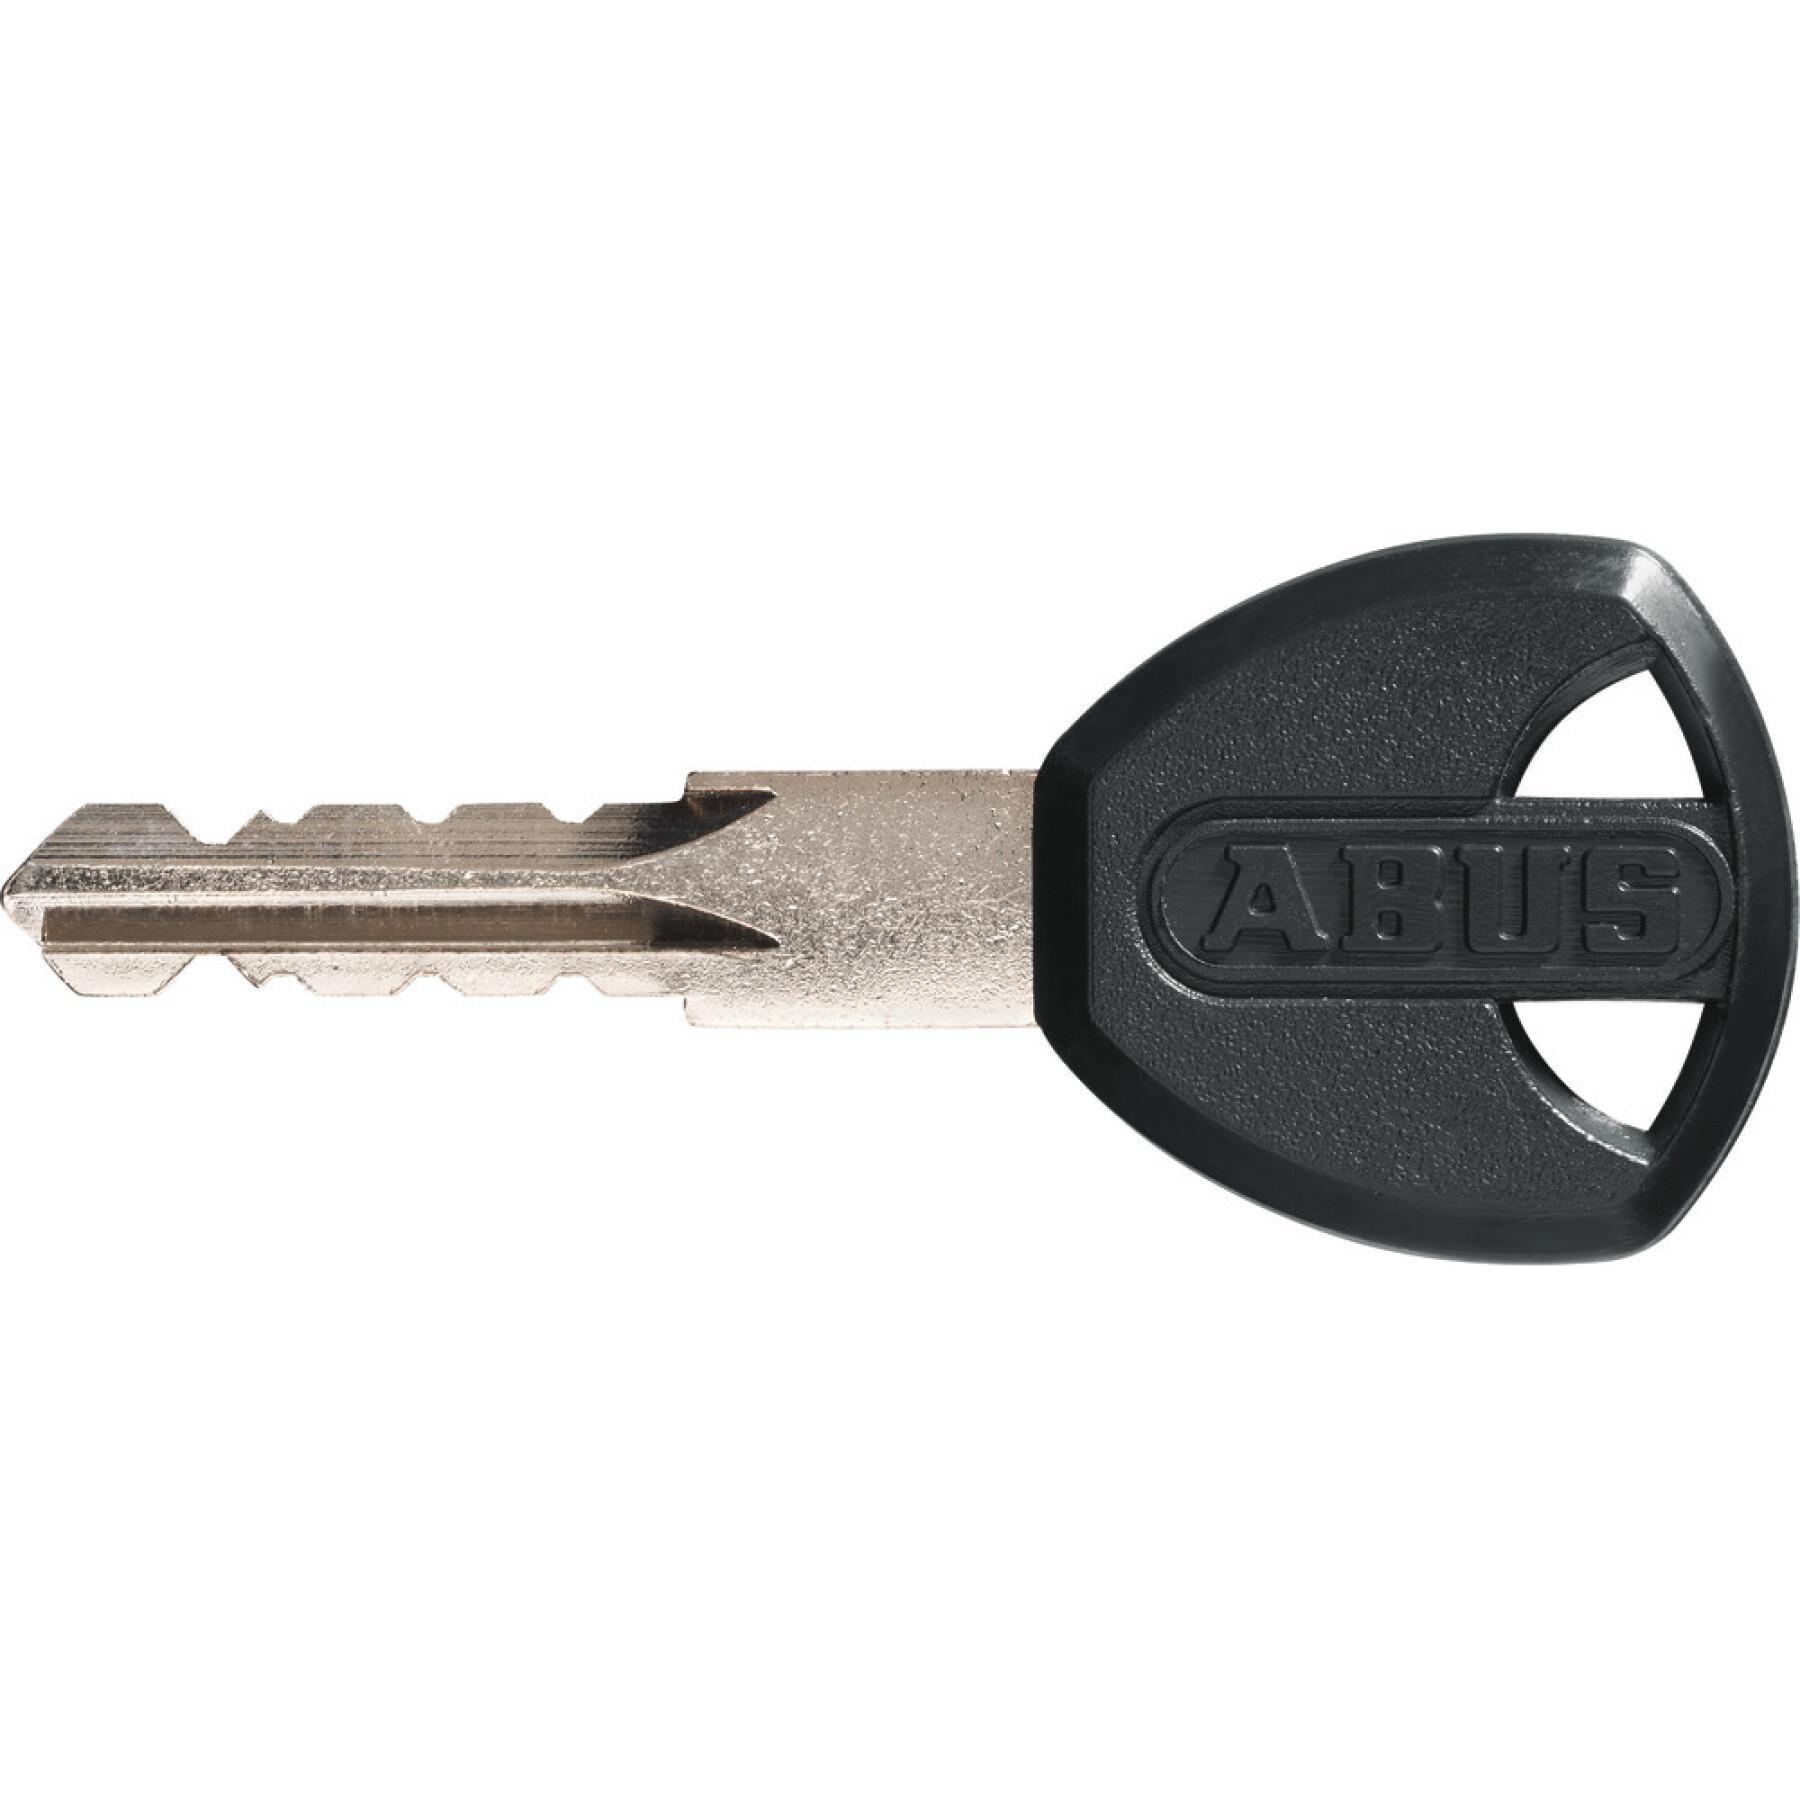 Cable lock Abus Star 4508K/150